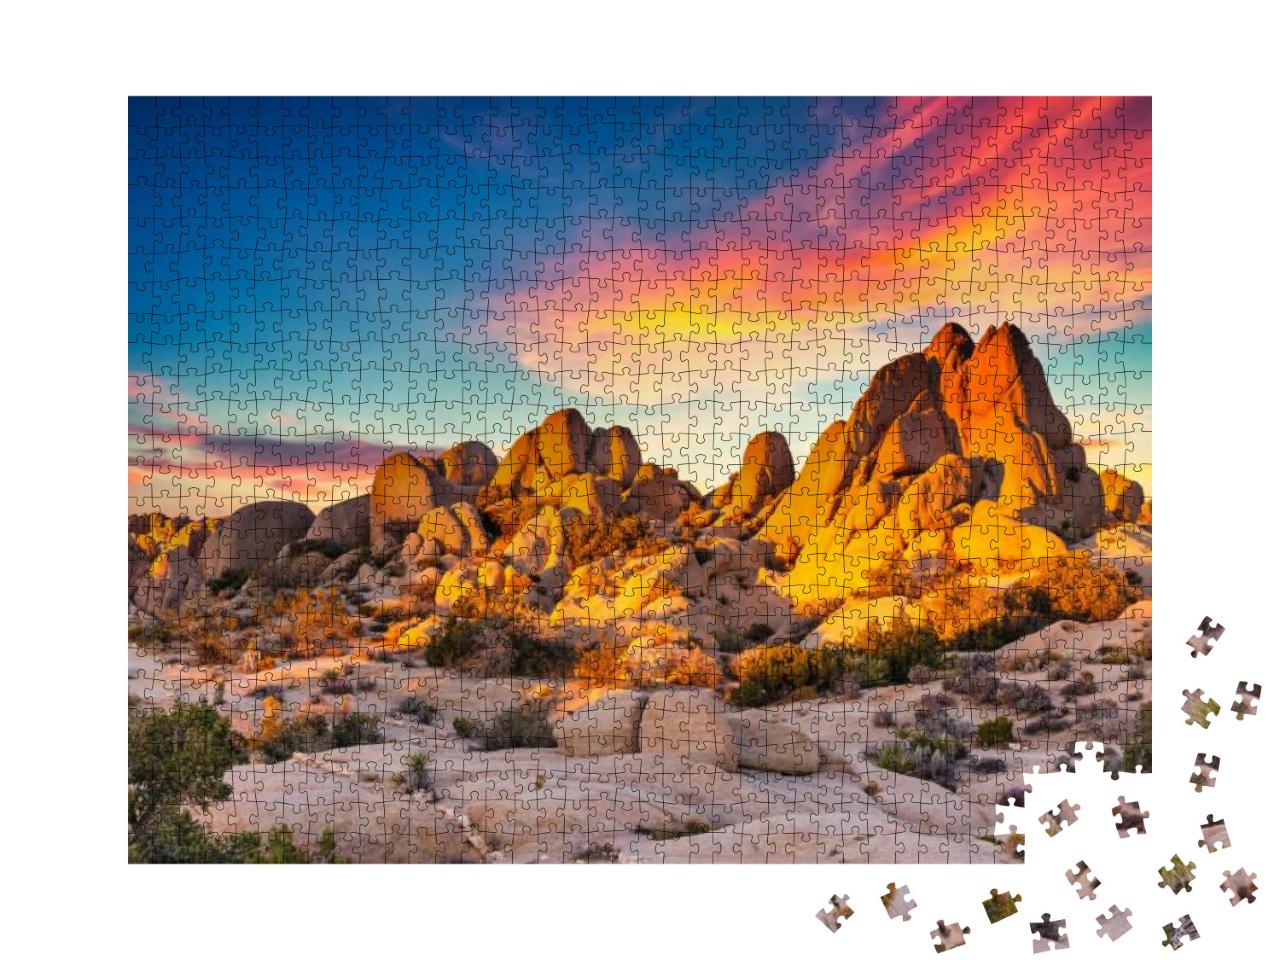 Rocks in Joshua Tree National Park Illuminated by Sunset... Jigsaw Puzzle with 1000 pieces